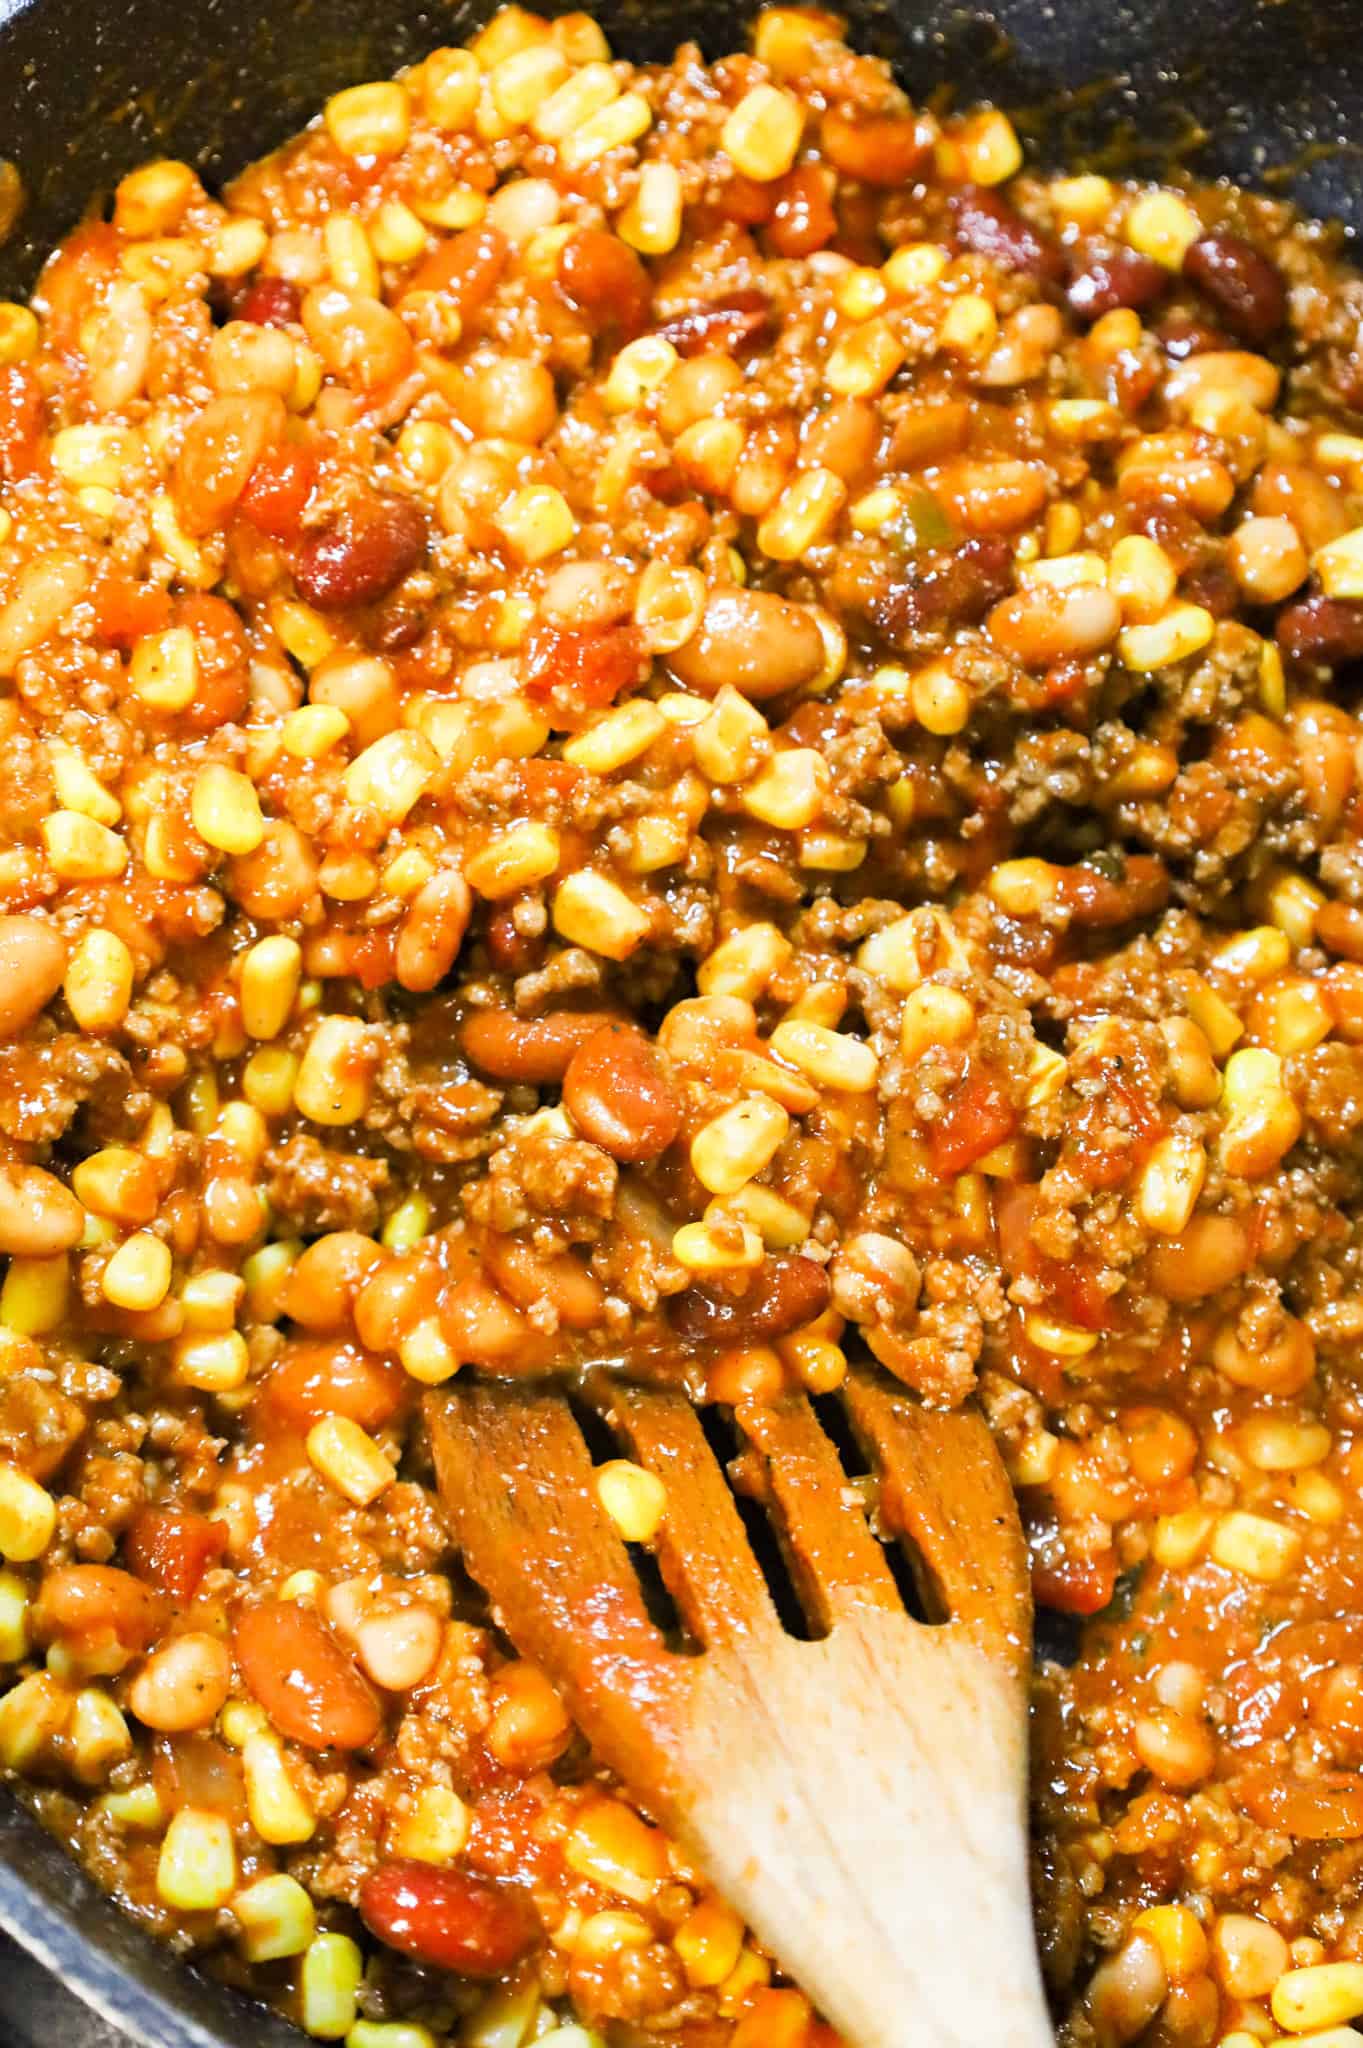 corn, beans, salsa and ground beef mixture in a skillet